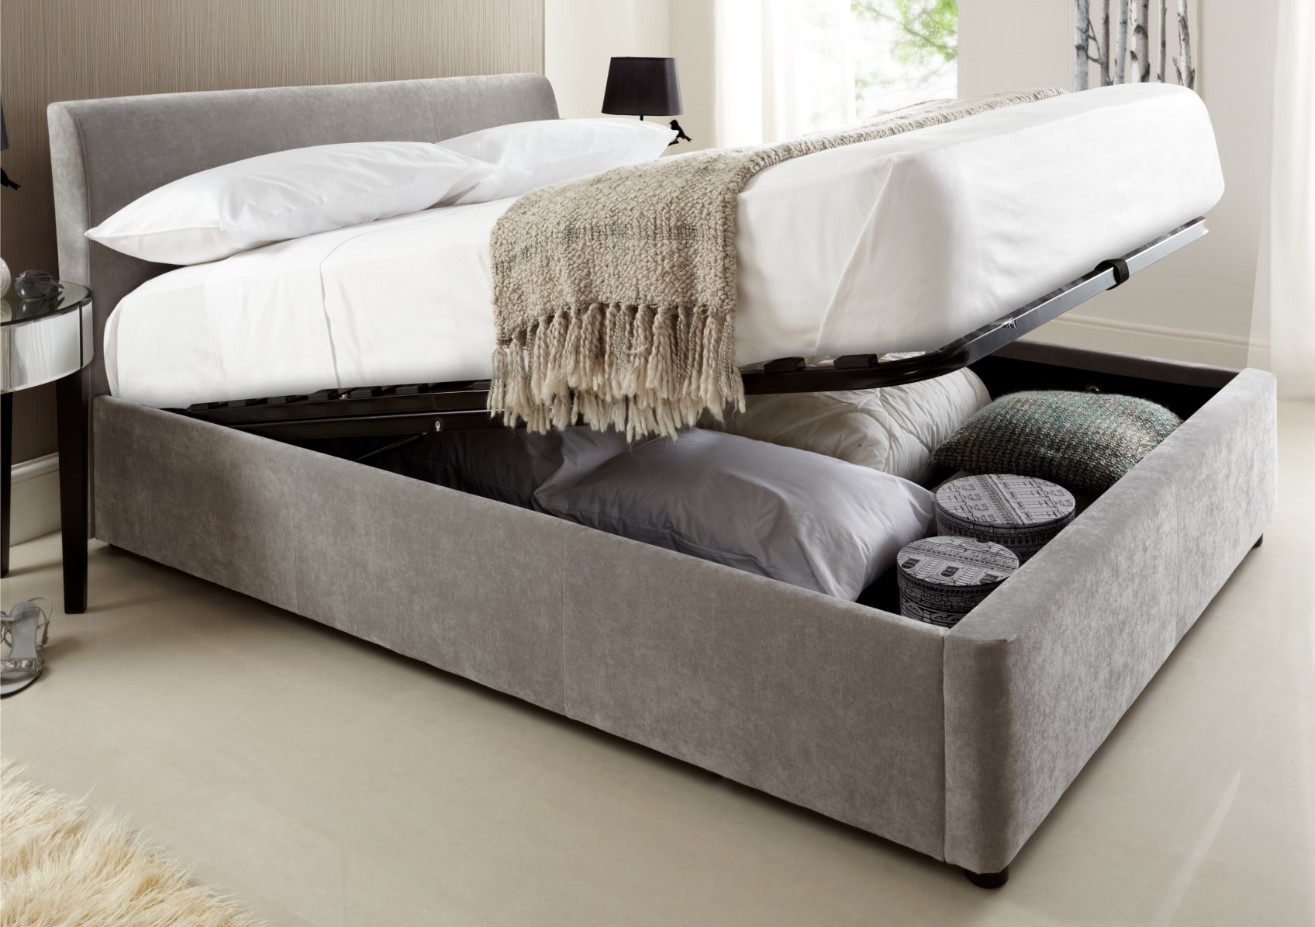 Creative Ways to Organize Small Rooms with a Storage Bed Frame